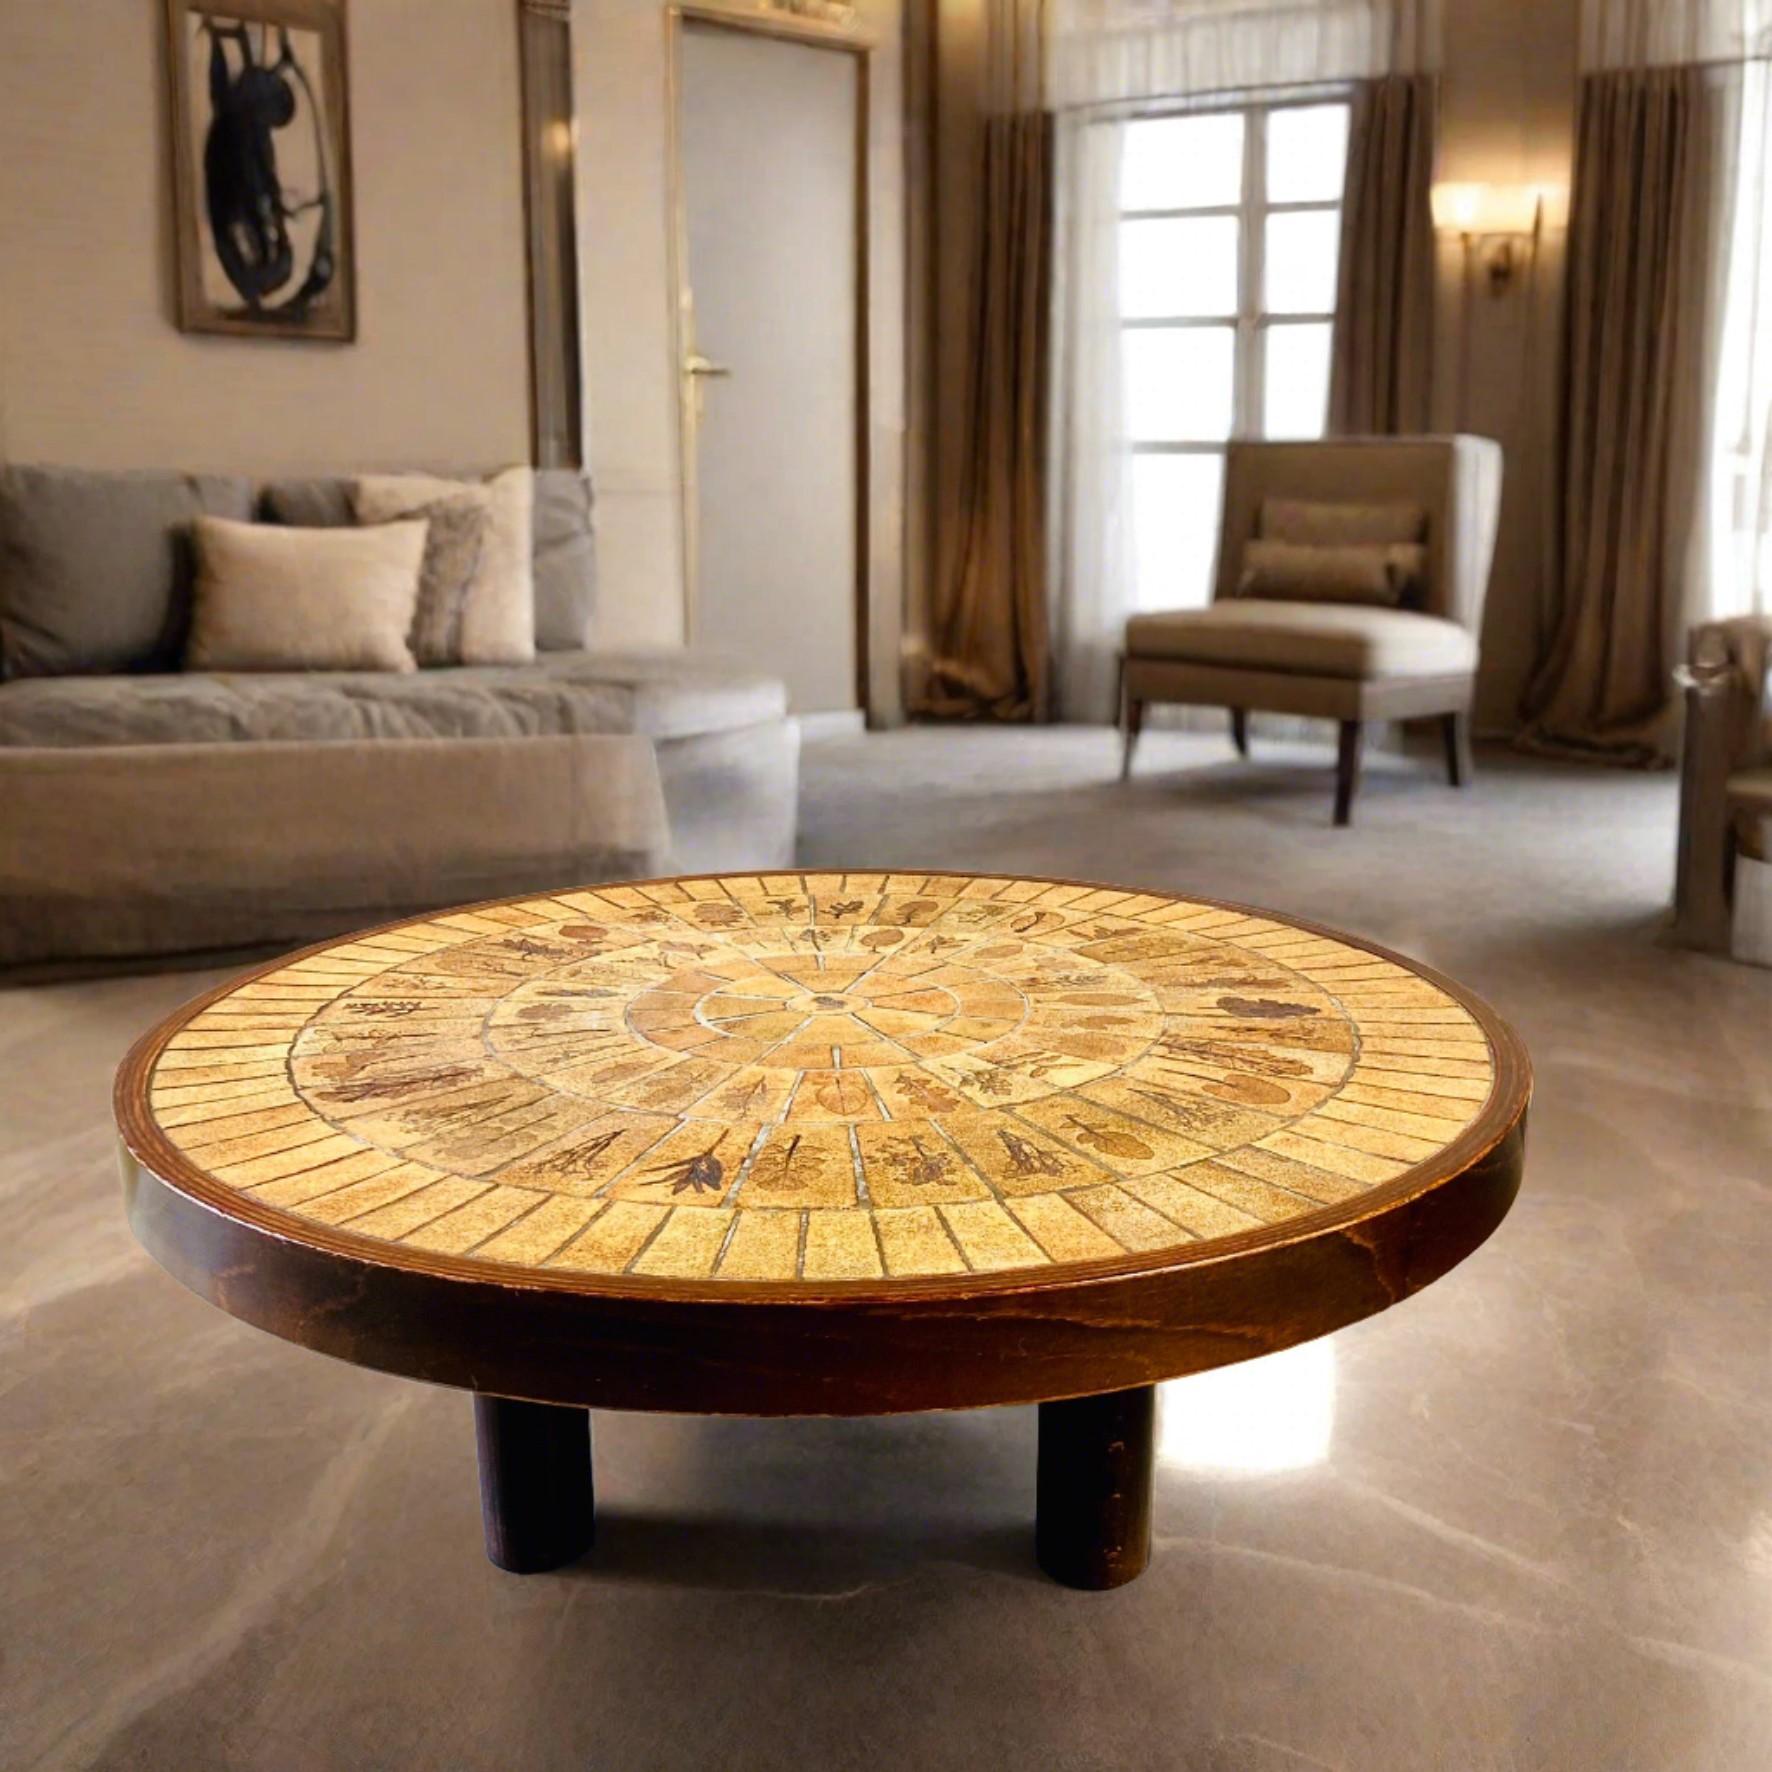 Mid-20th Century Round Brutalist Ceramic Coffee Table by Roger Capron, France 1960 For Sale